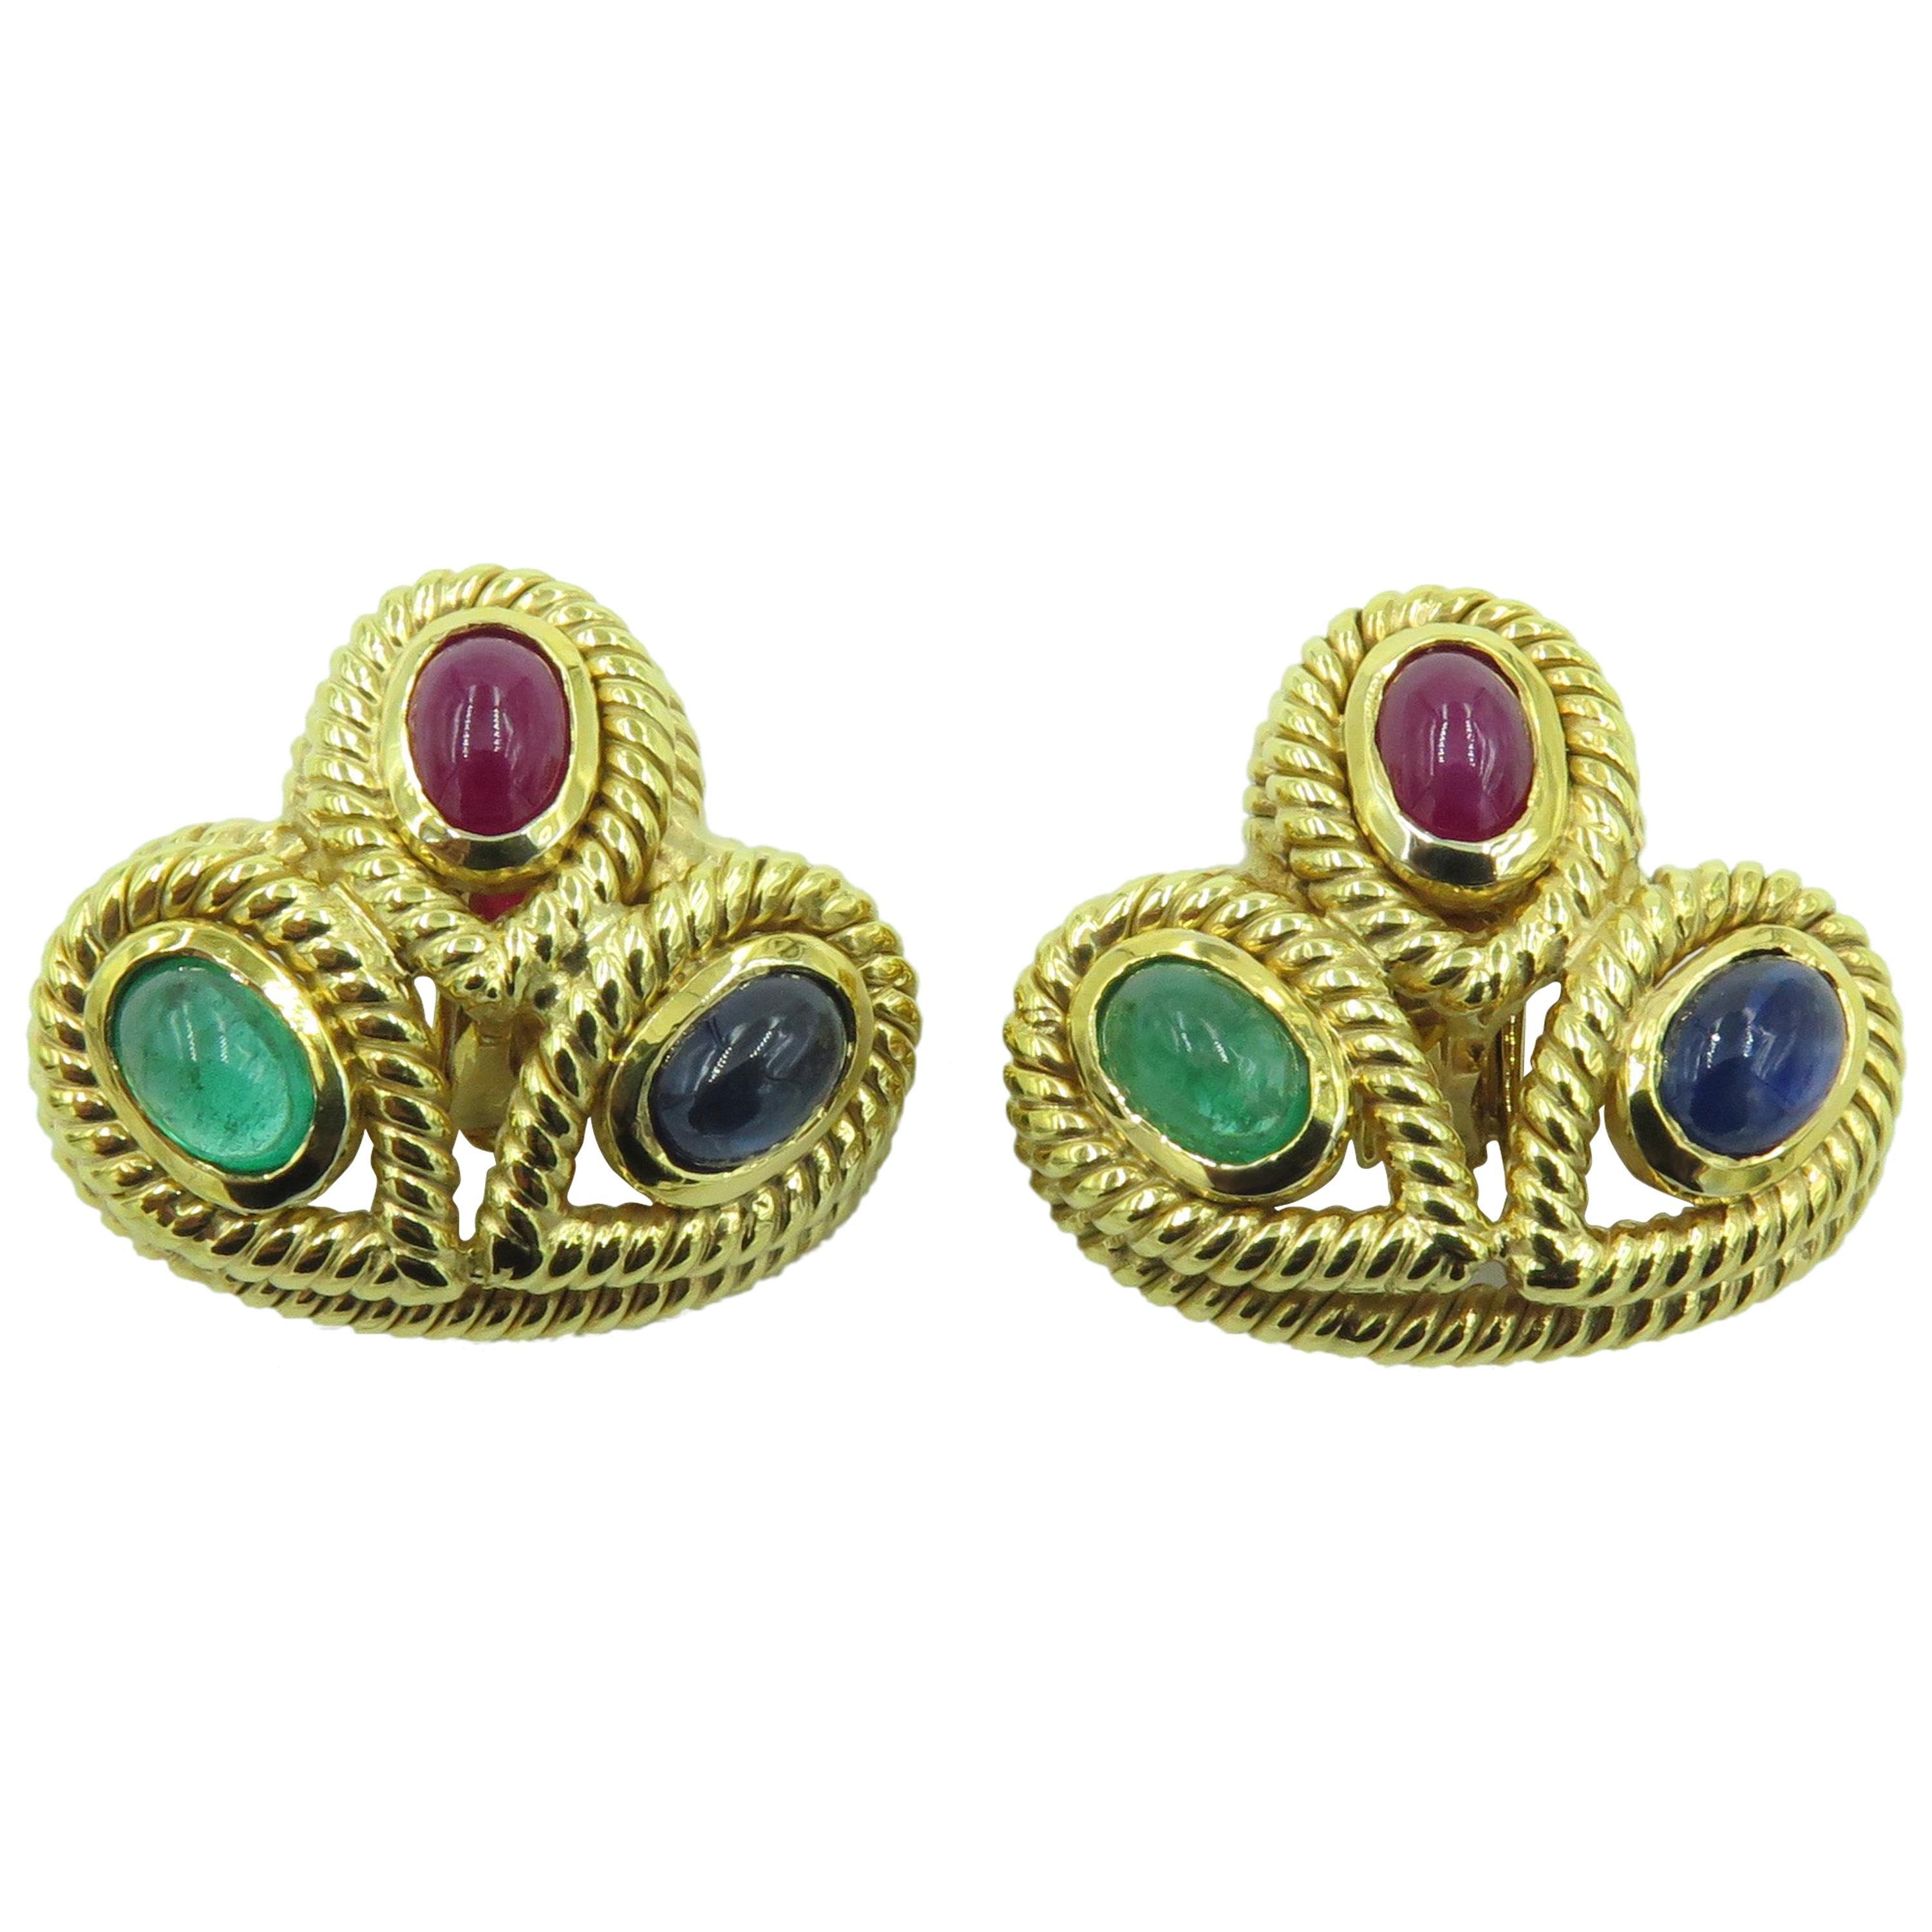 Pair of Gem Set and Gold Earrings